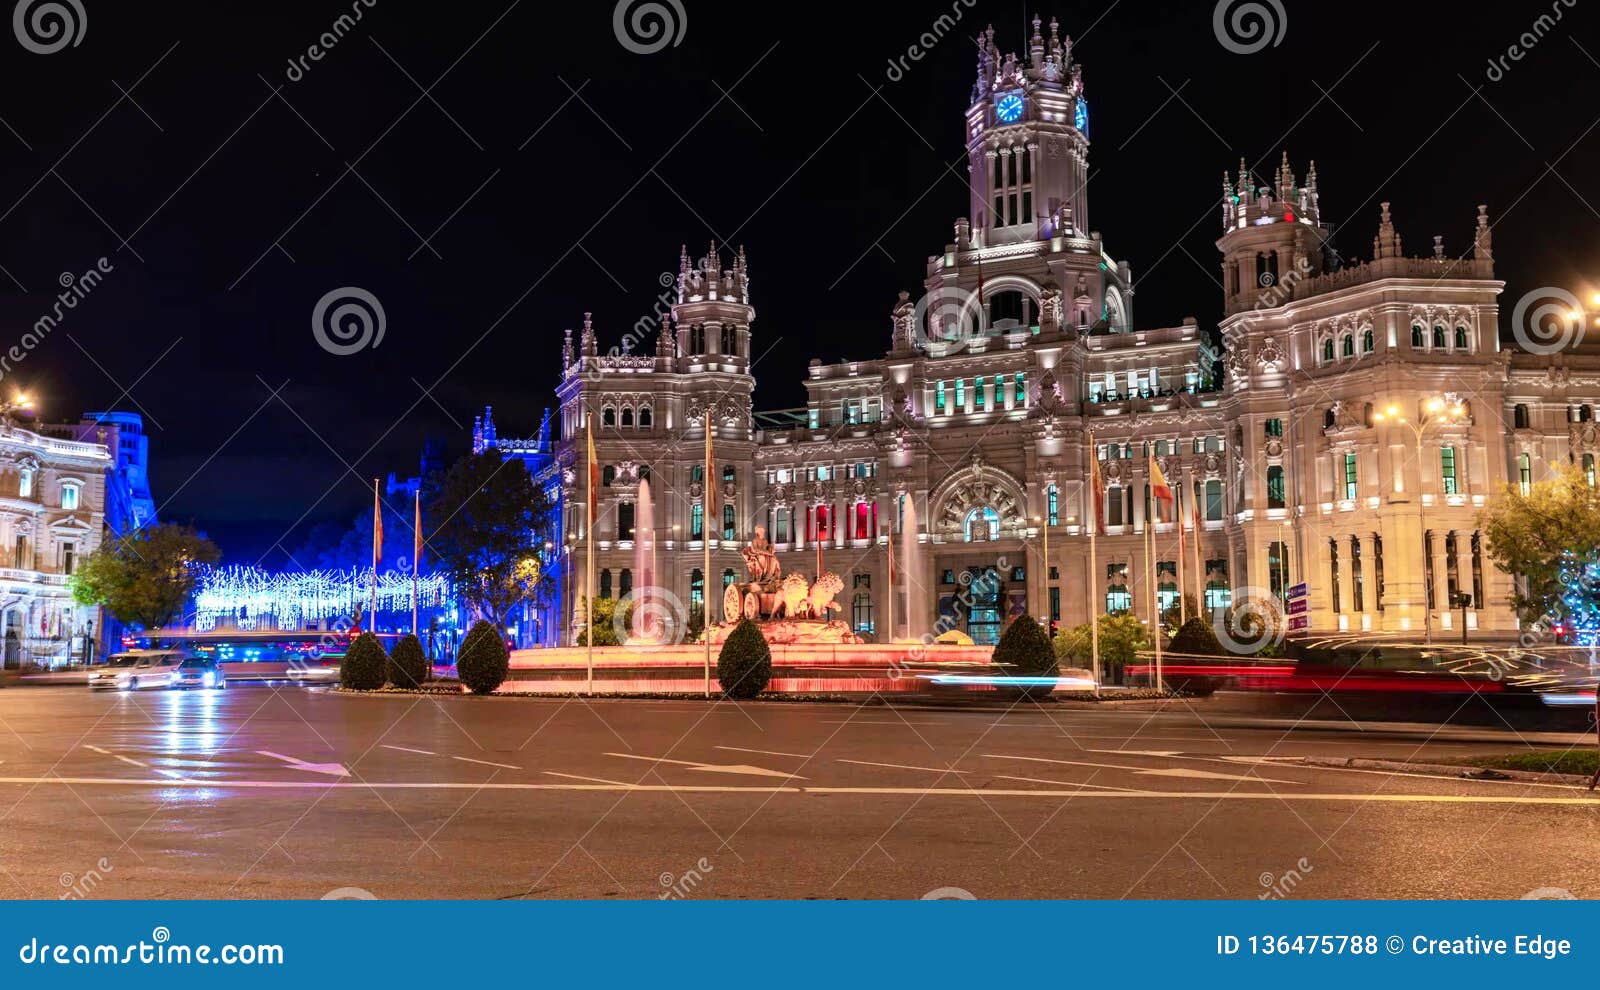 Natale A Madrid.Christmas Decorations And Lights In Madrid By Night Stock Photo Image Of Downtown Famous 136475788